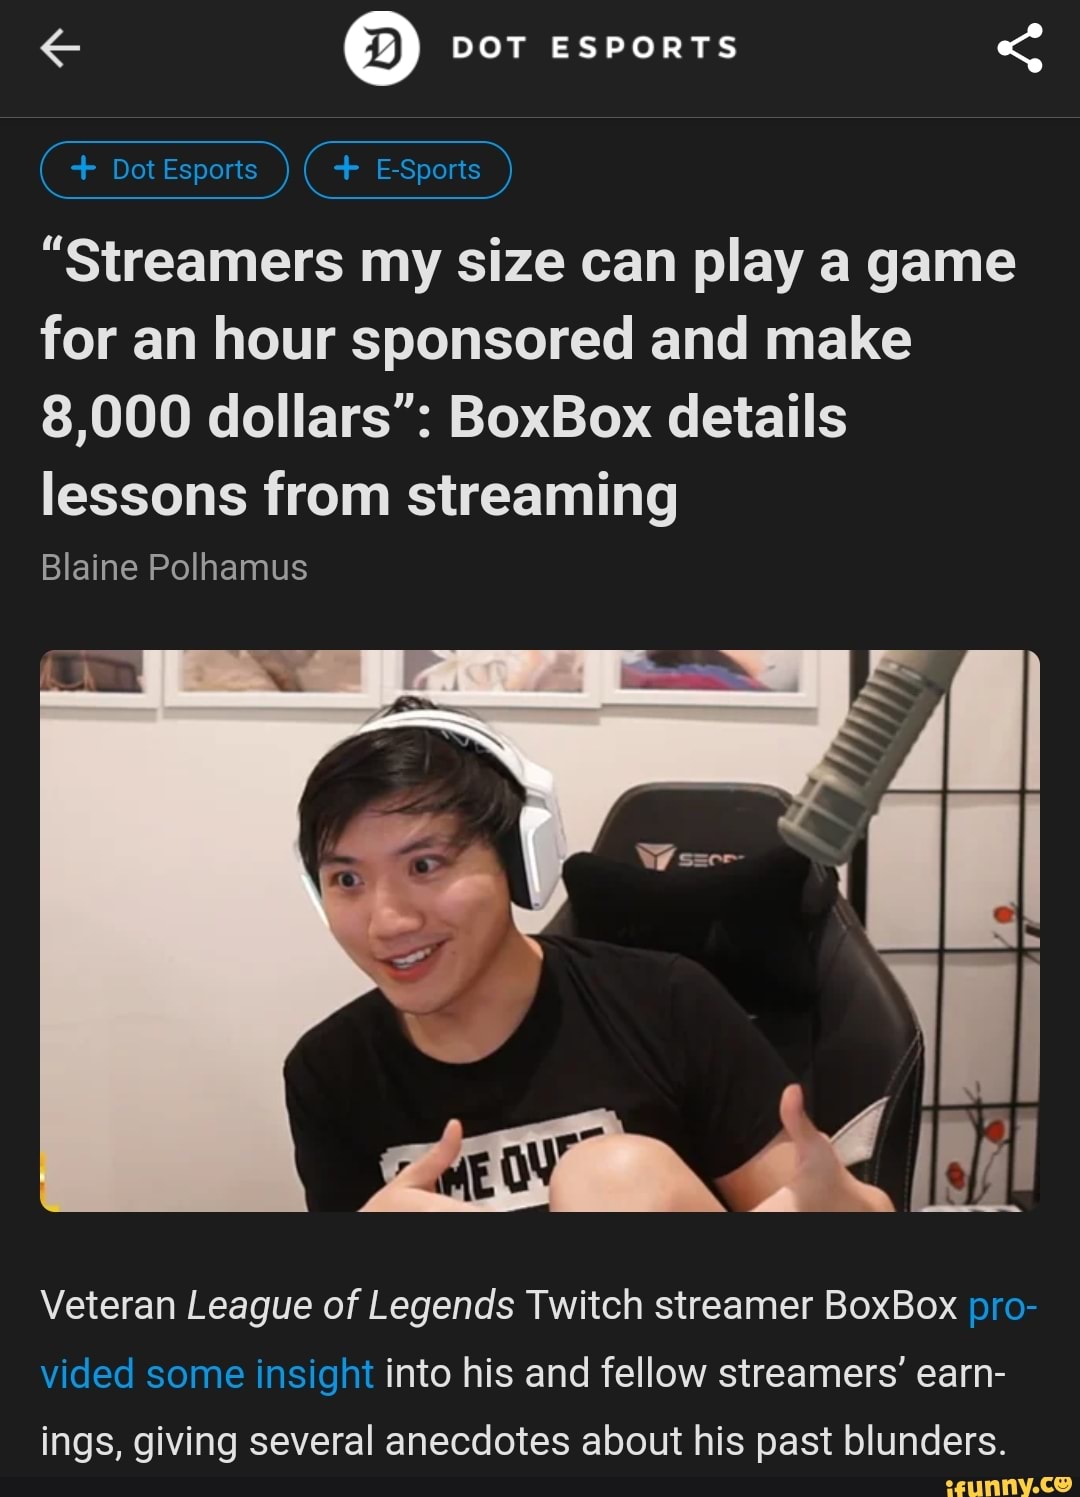 Streamers my size can play a game for an hour sponsored and make 8,000  dollars': BoxBox details lessons from streaming - Dot Esports